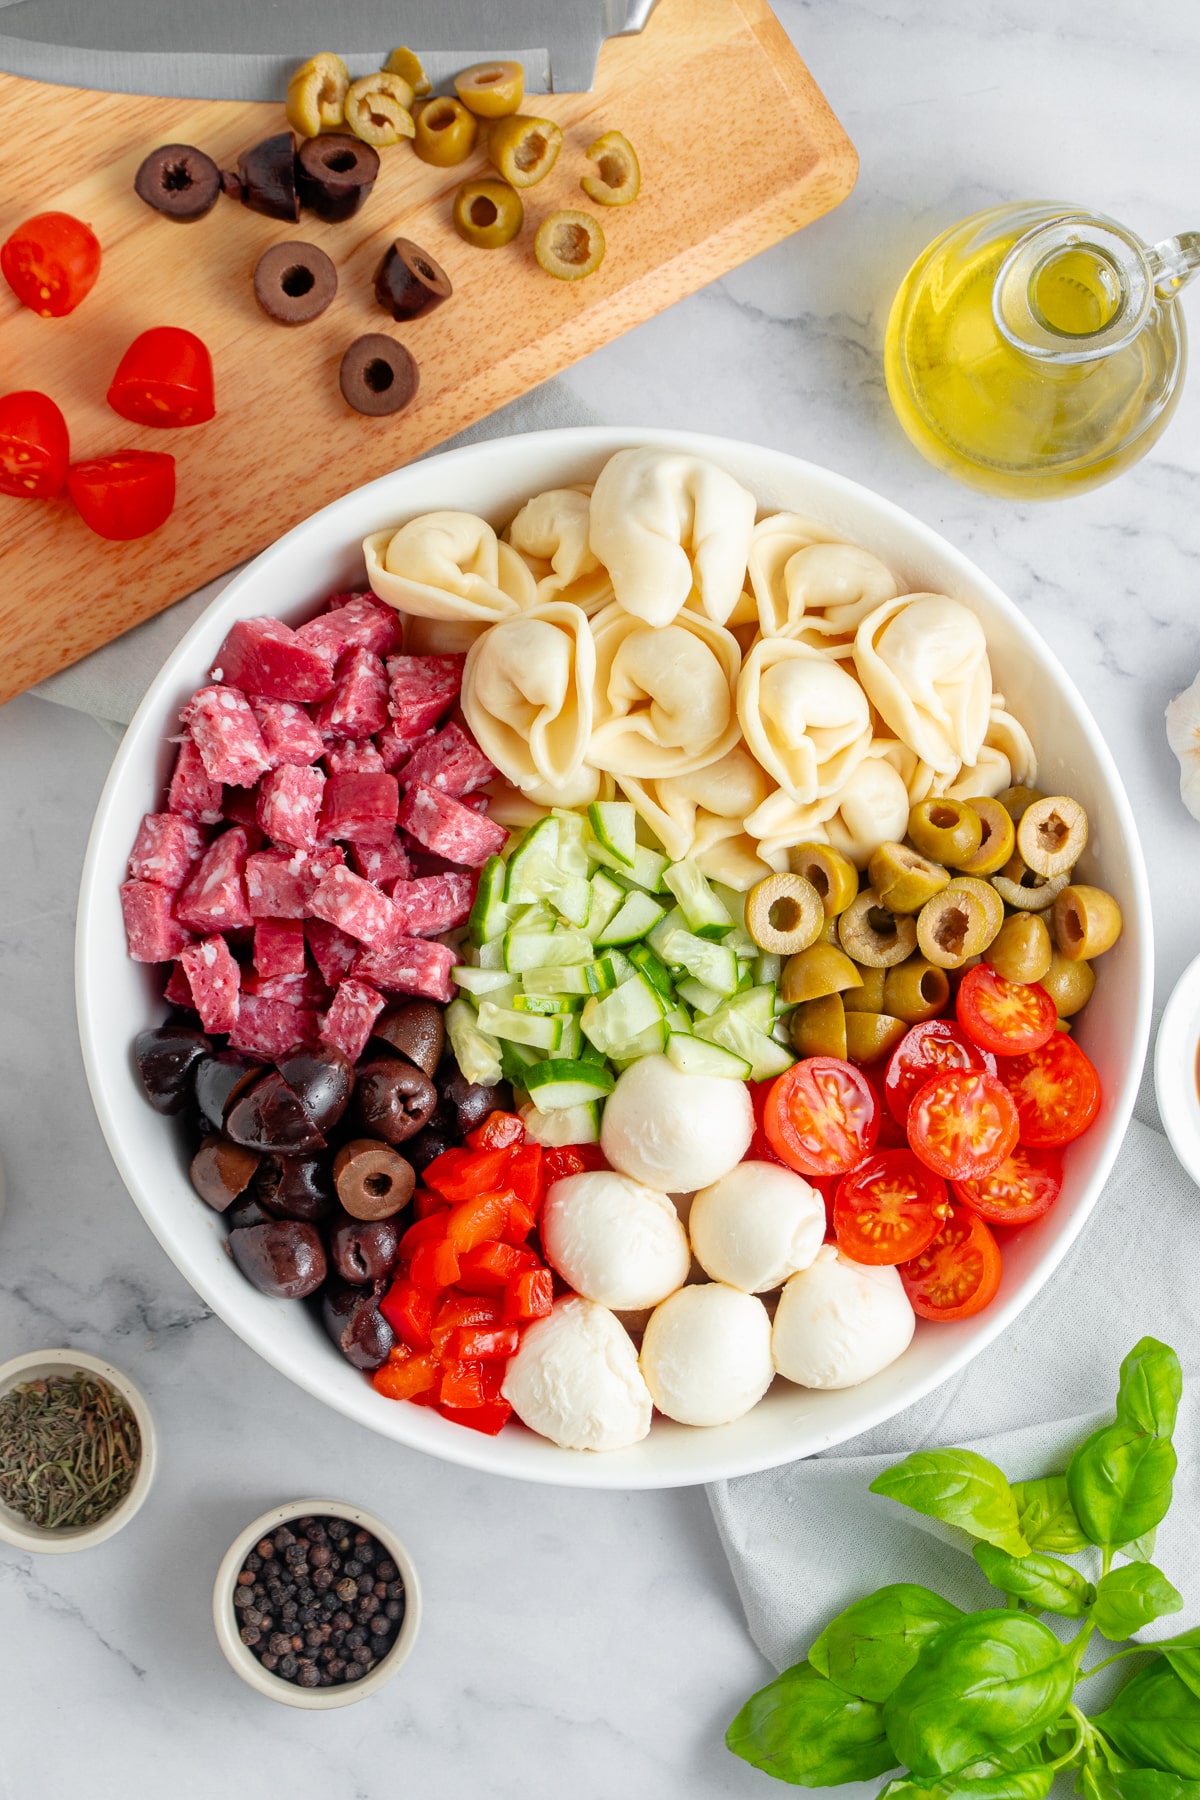 Tortellini salad being mixed into a large bowl.